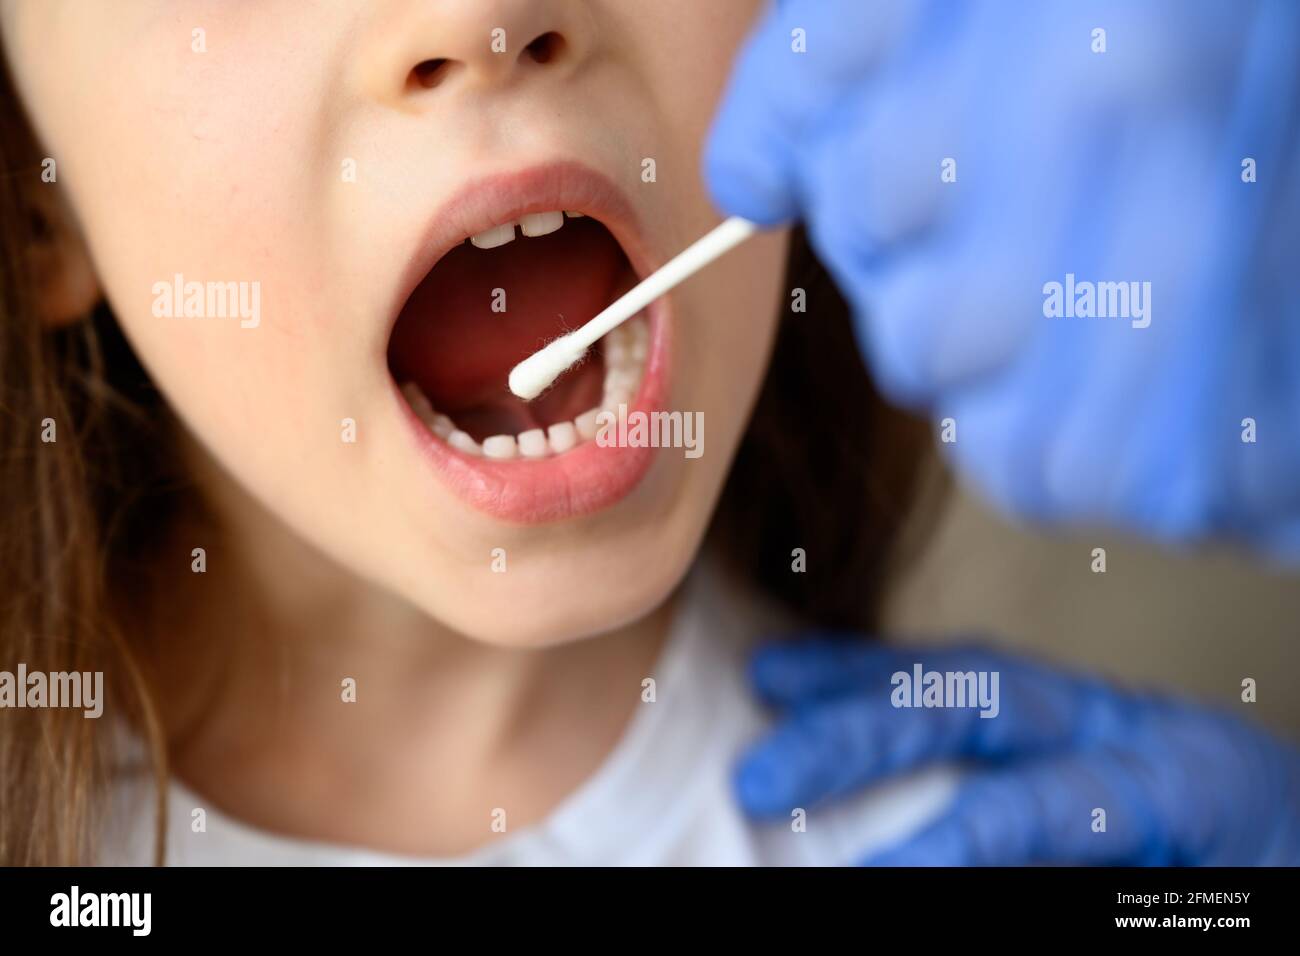 Coronavirus test and mouth, kid opens mouth for COVID-19 diagnostics. Doctor or nurse holds swab for saliva sample from child. Corona virus oral PCR t Stock Photo